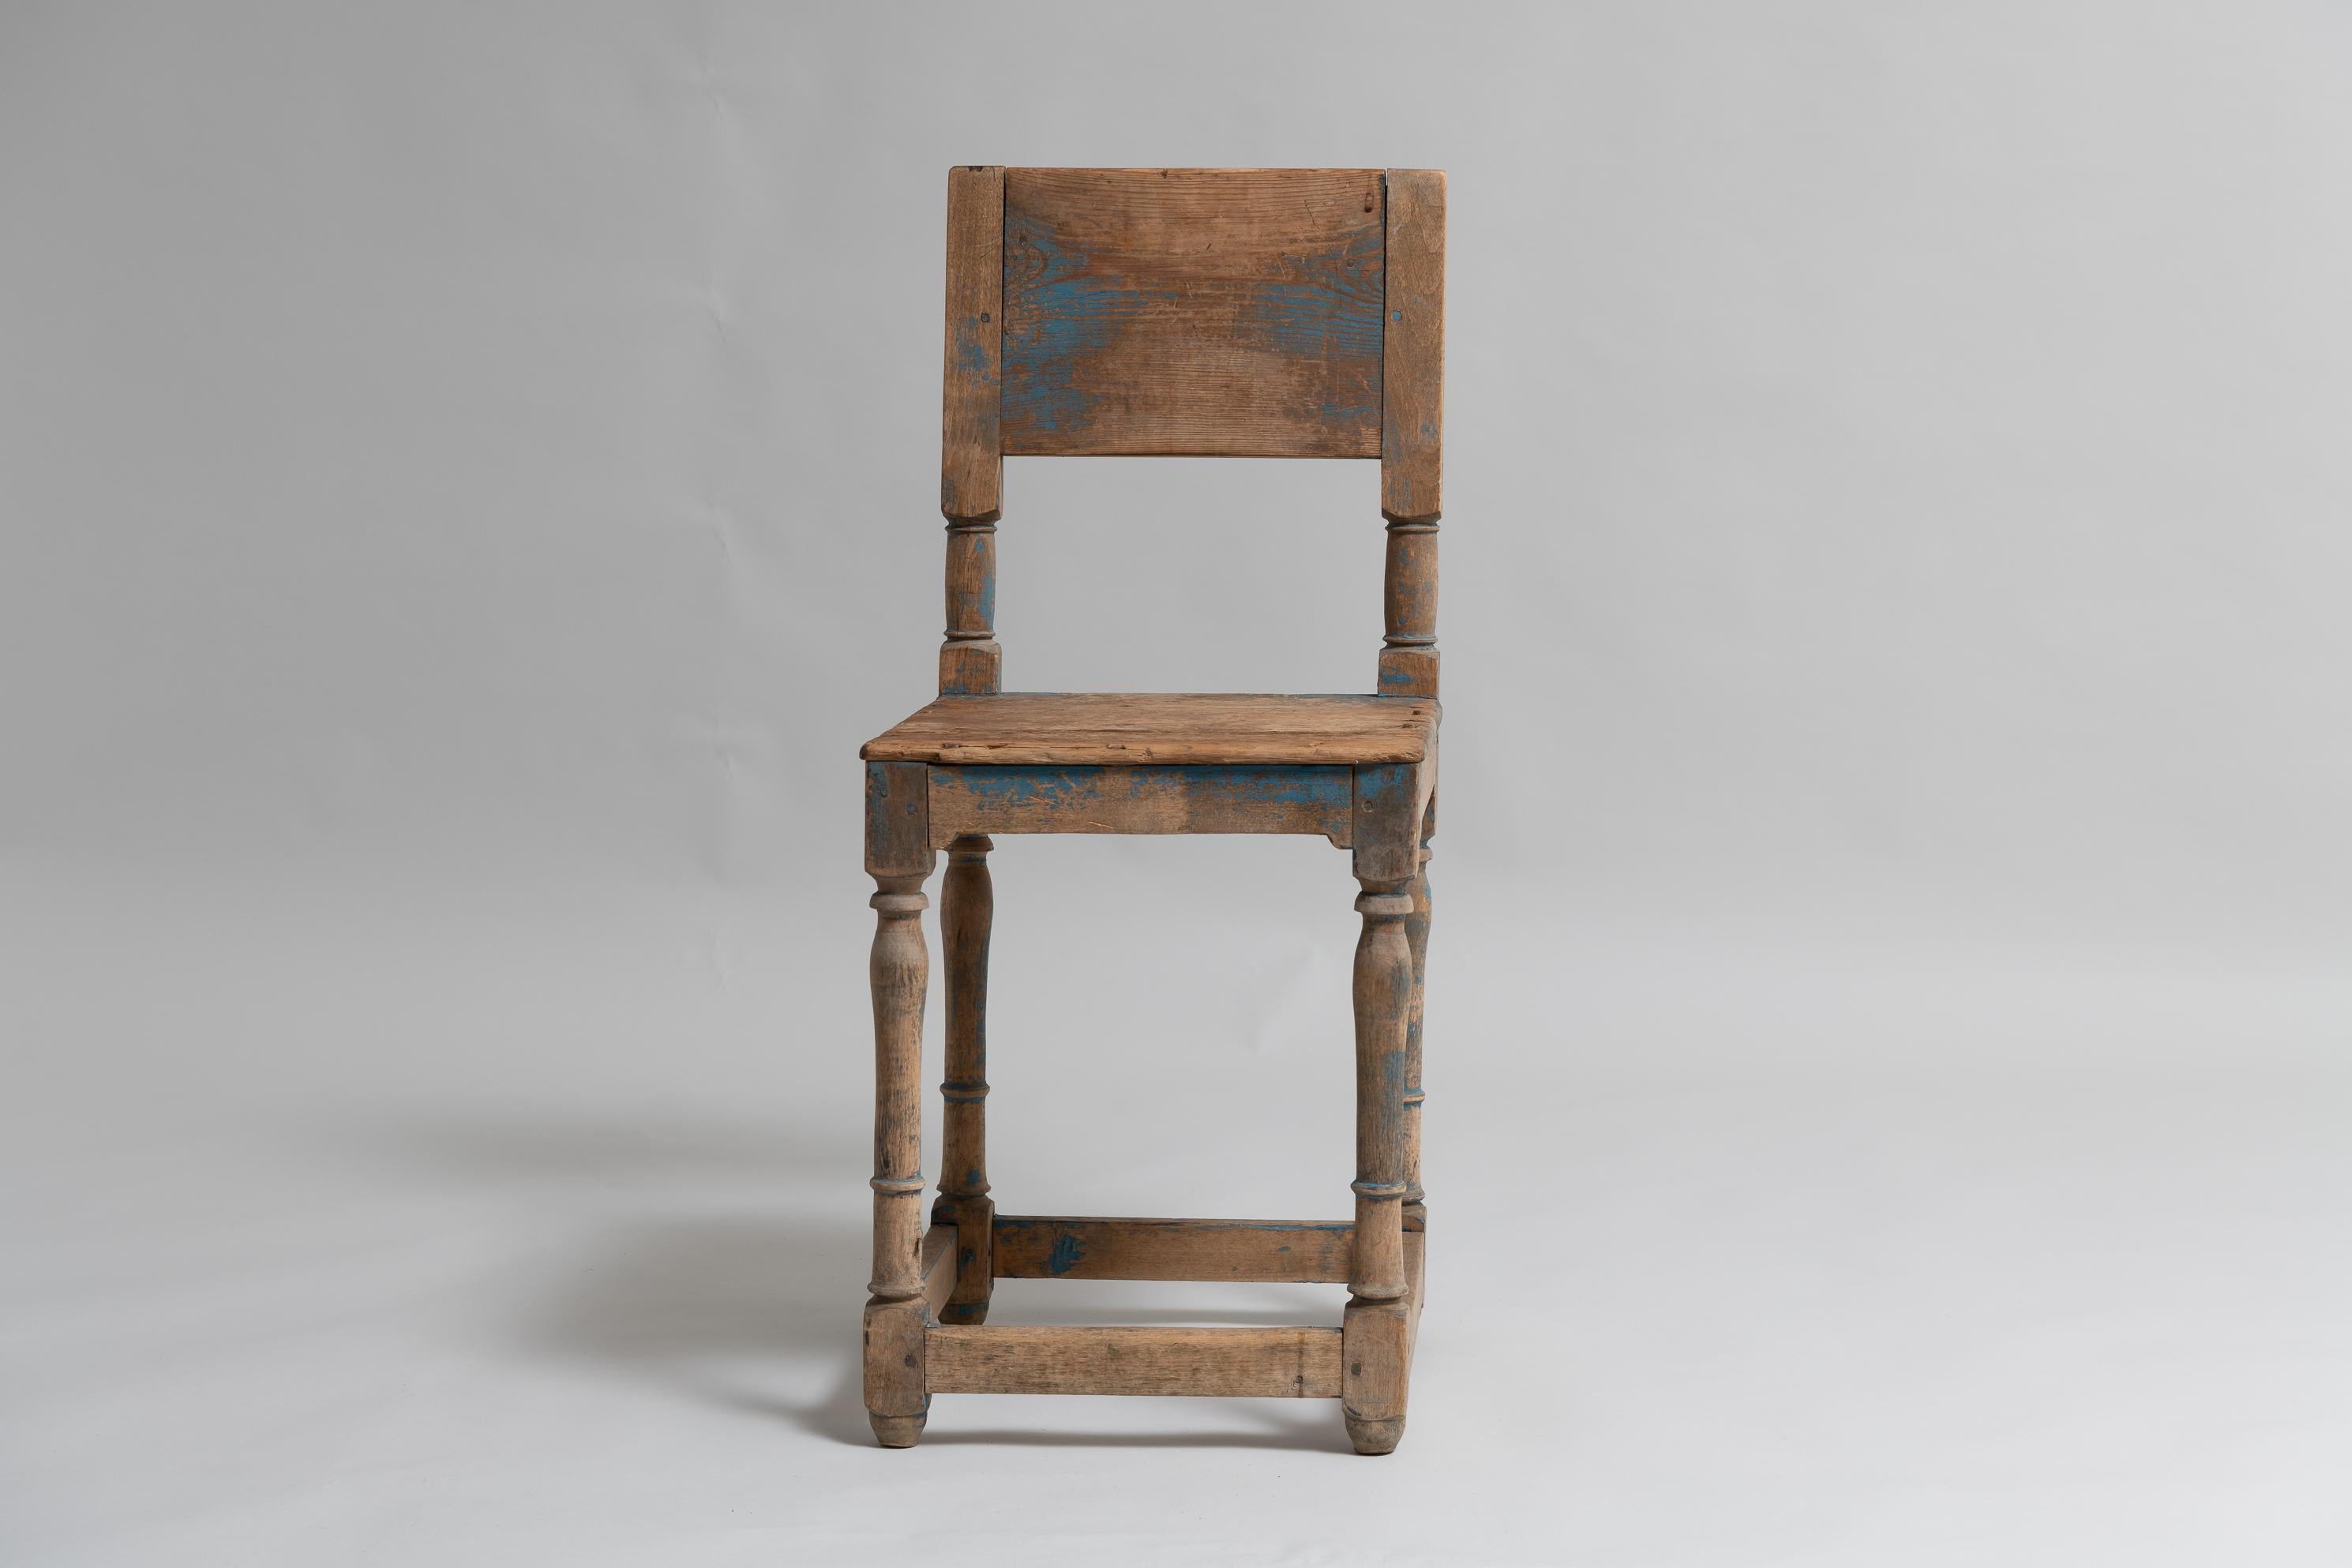 Hand-Crafted 19th Century Swedish Country Renaissance Revival Chair